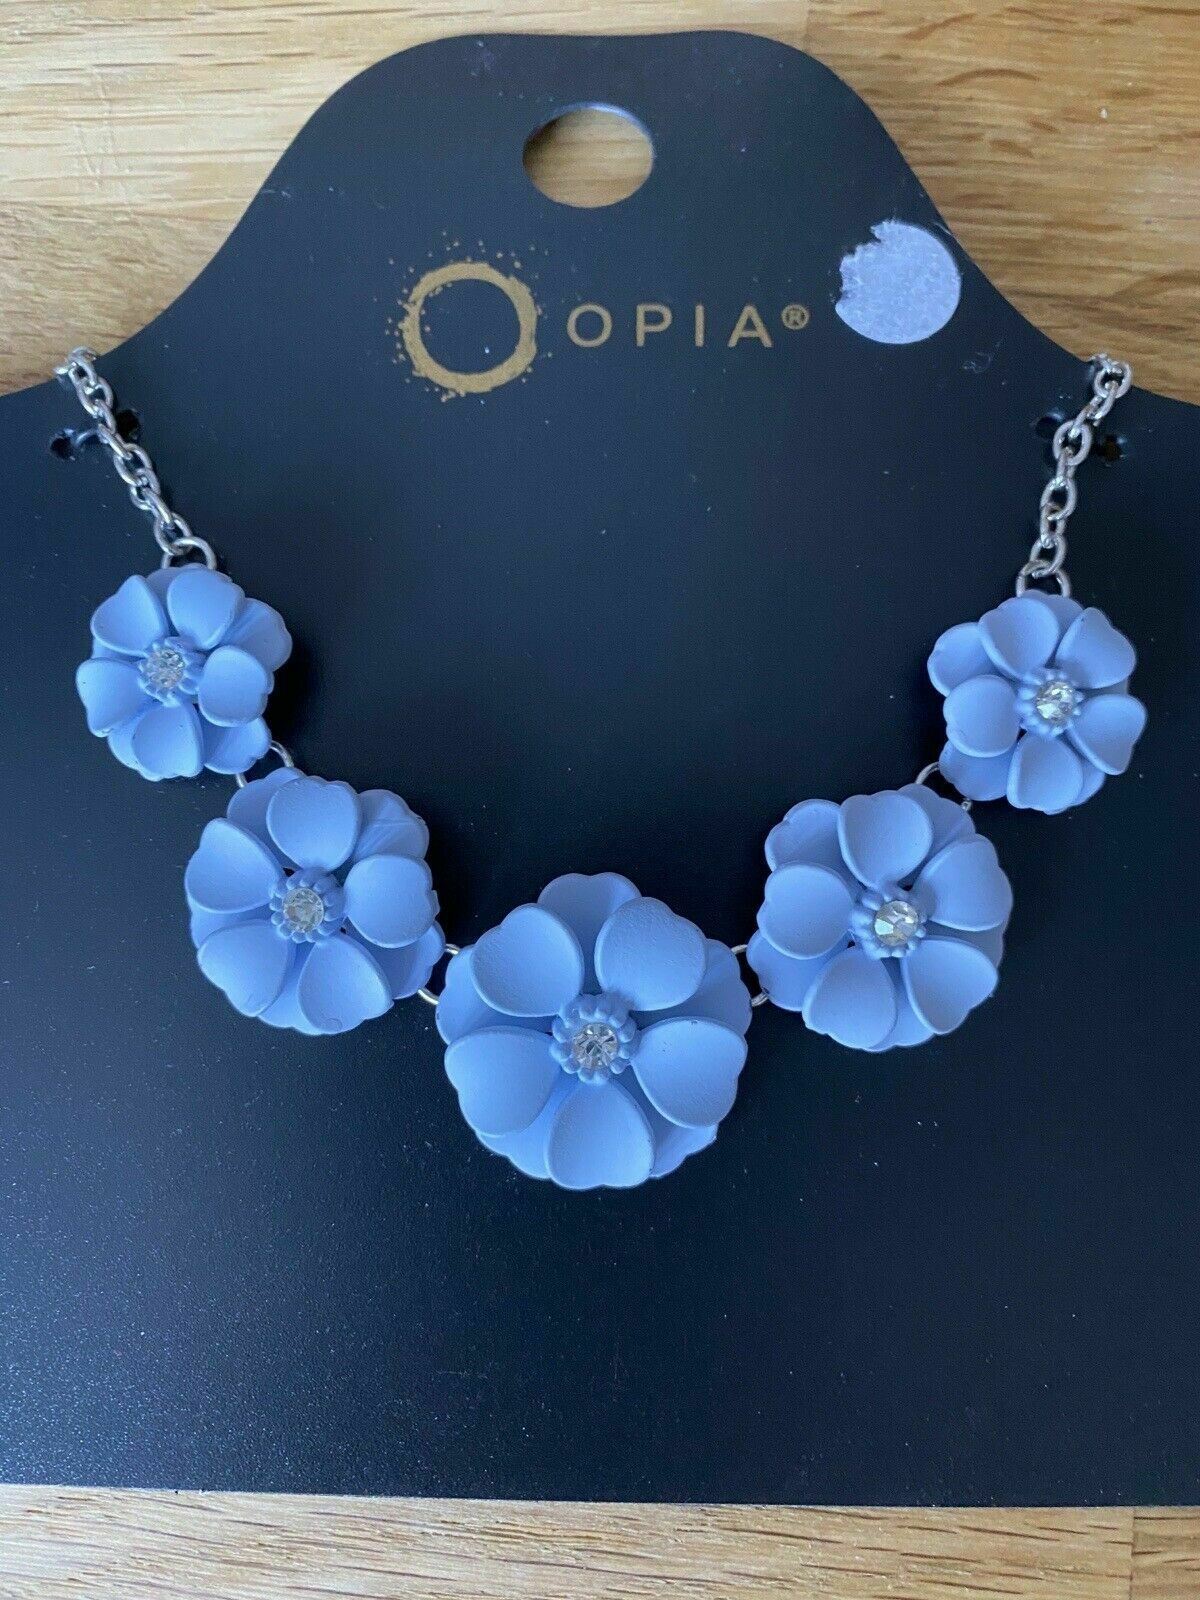 Primark Opia Flower Necklace blue Flowers Silver Plated Chain Costume Jewellery